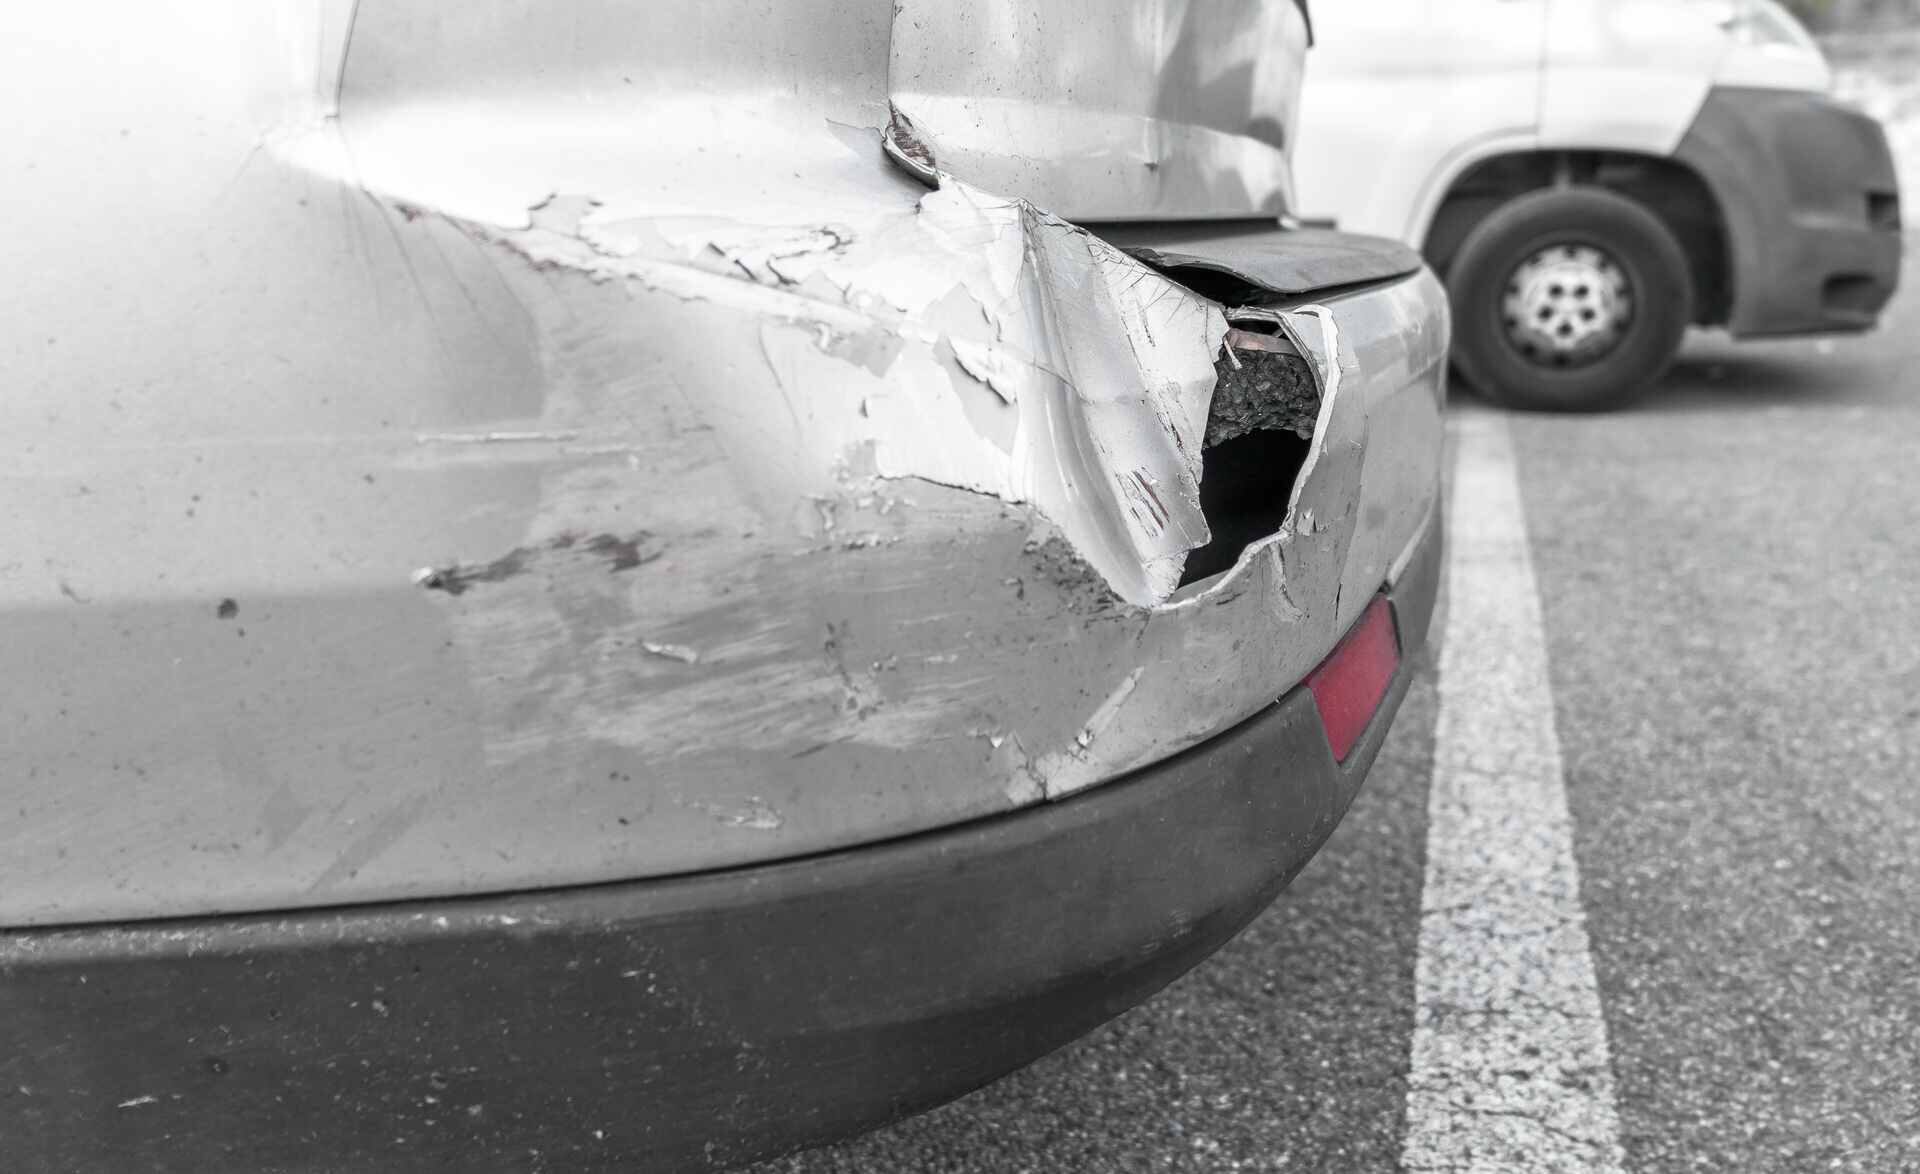 A car that is in need of bumper repair after an accident on a road in Minnesota